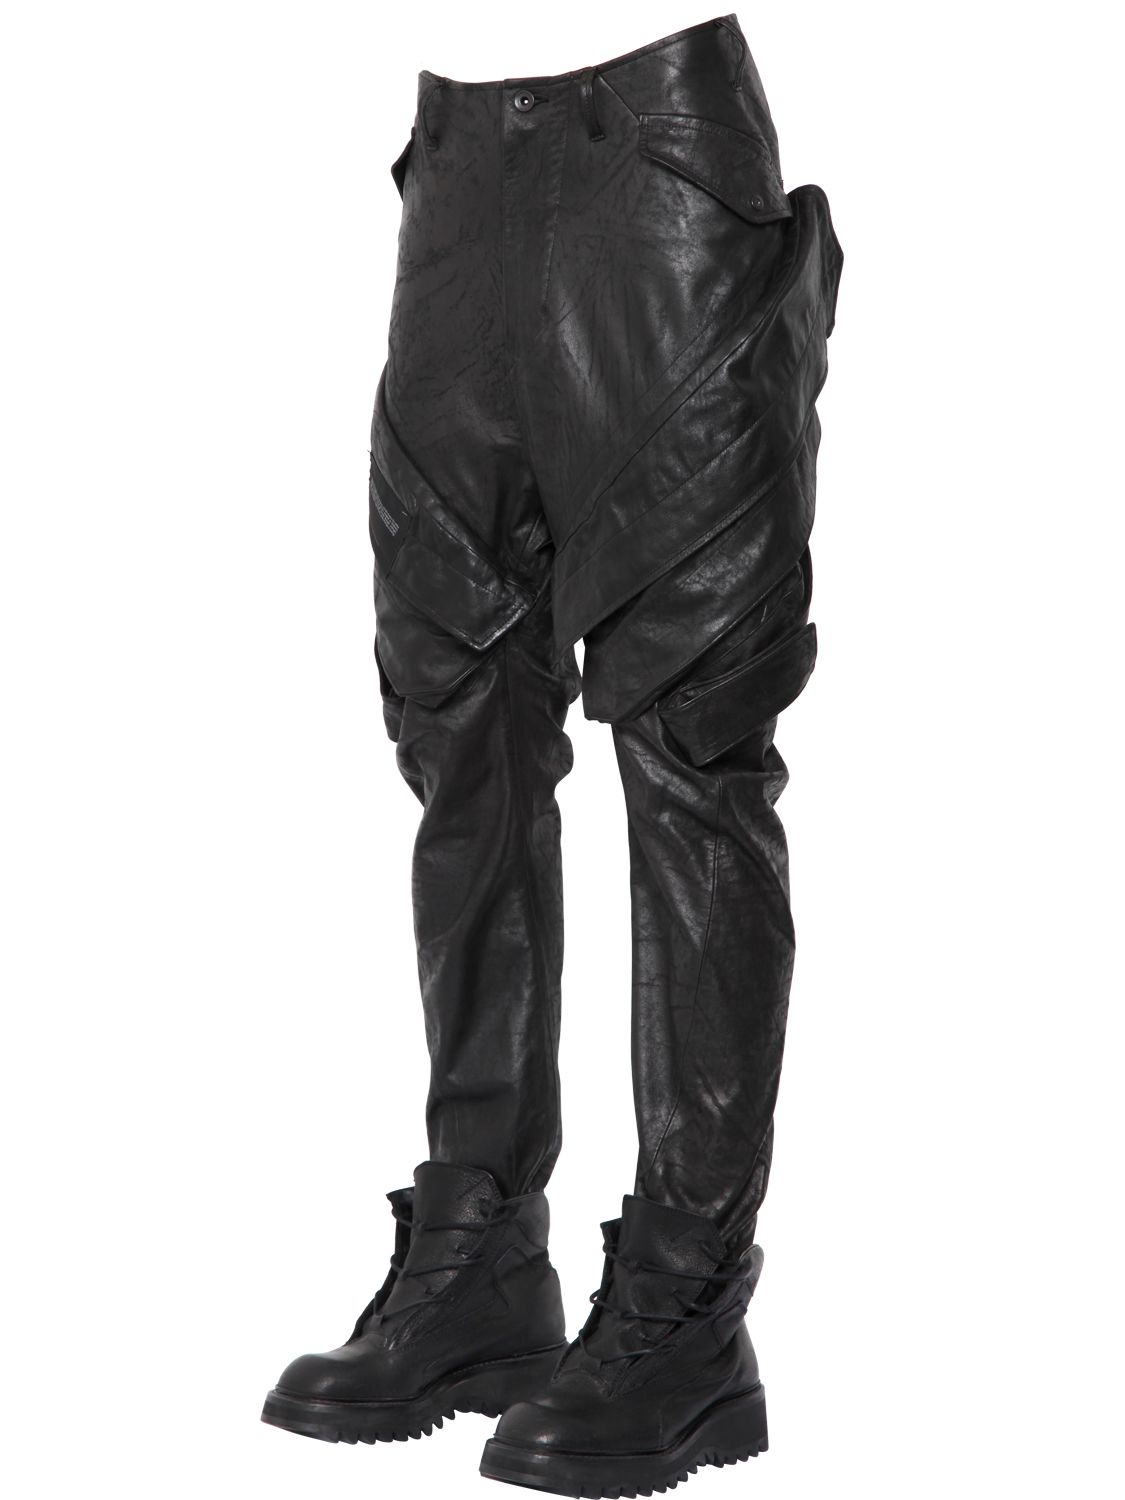 Lyst - Julius Nappa Leather Cargo Pants in Black for Men